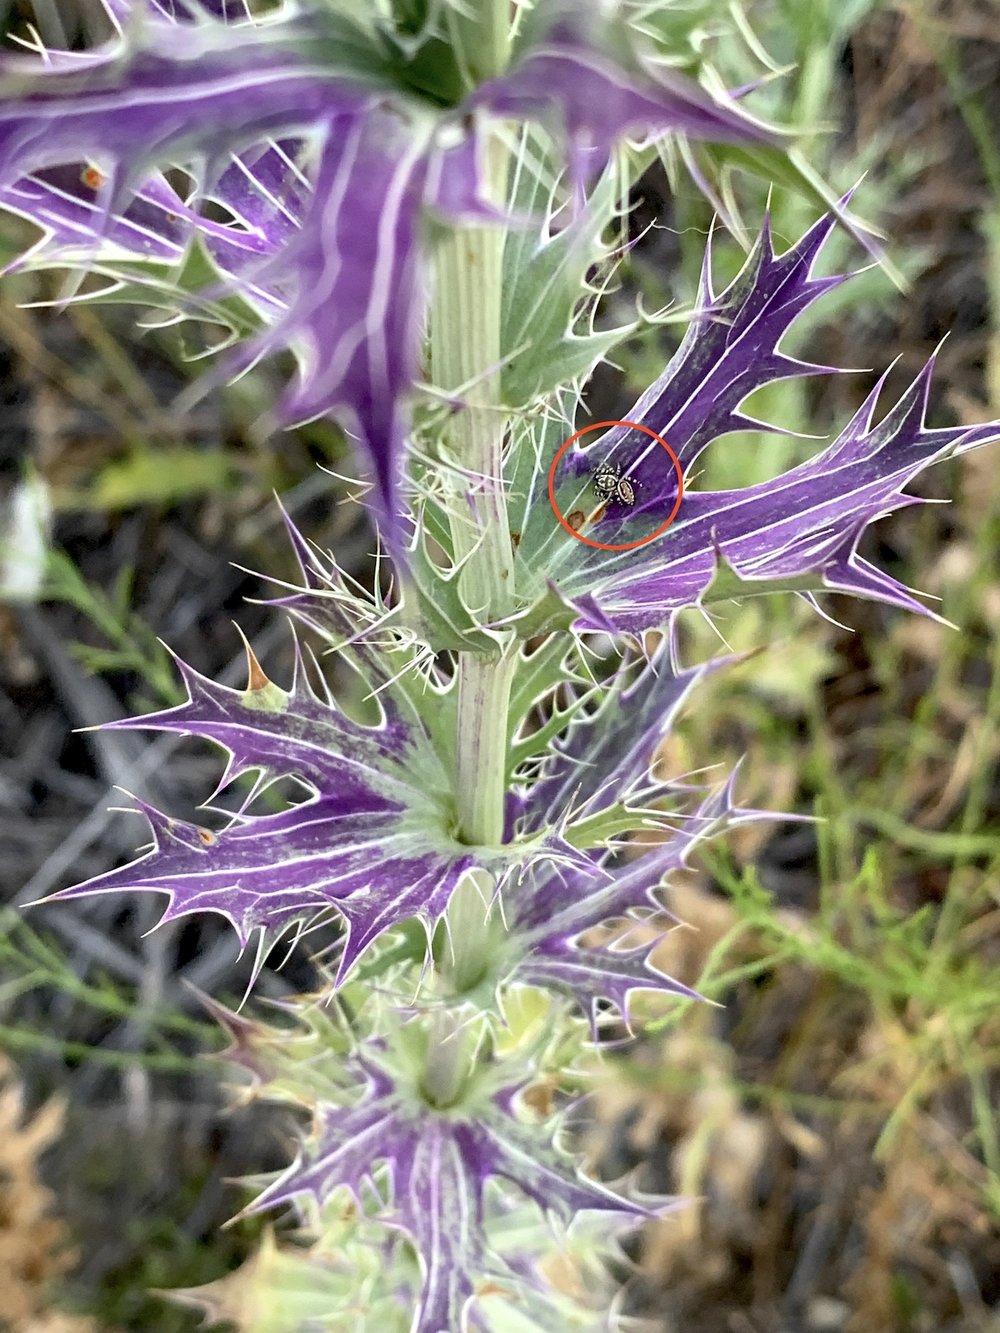   Leavenworth's Eryngo   (Eryngium leavenworthii)  attracts lots of insects both predator and prey. This one has a  Peppered Jumping Spider   (Pelegrina galathea .) 